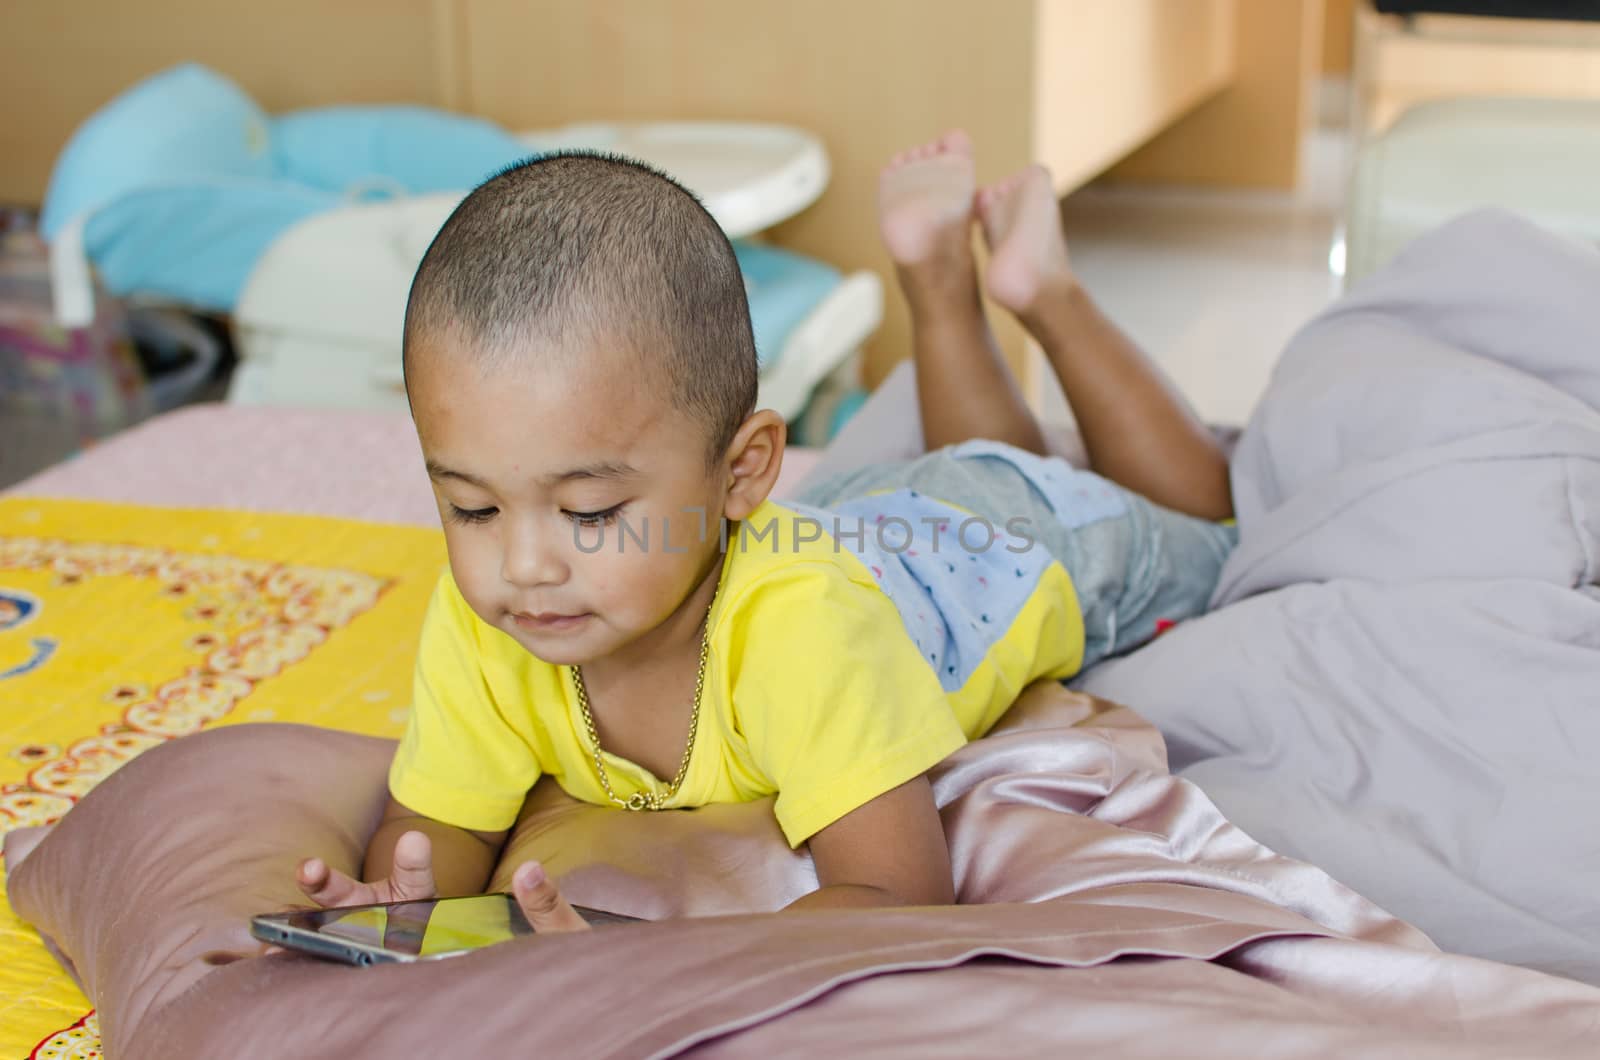 Boys play Smart phone on the bed.